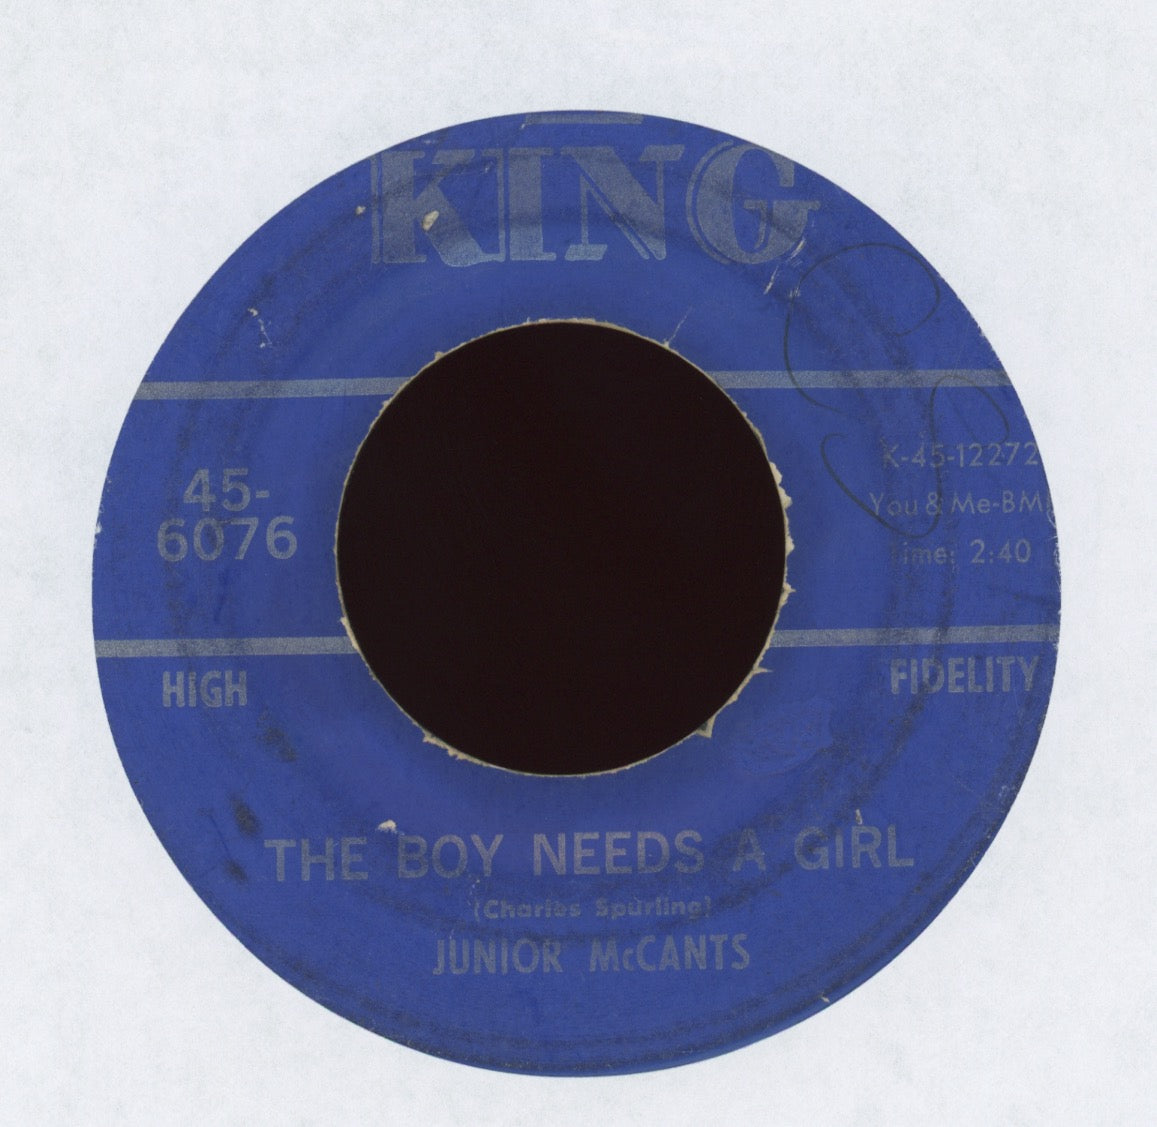 Junior McCants - The Boy Needs A Girl on King